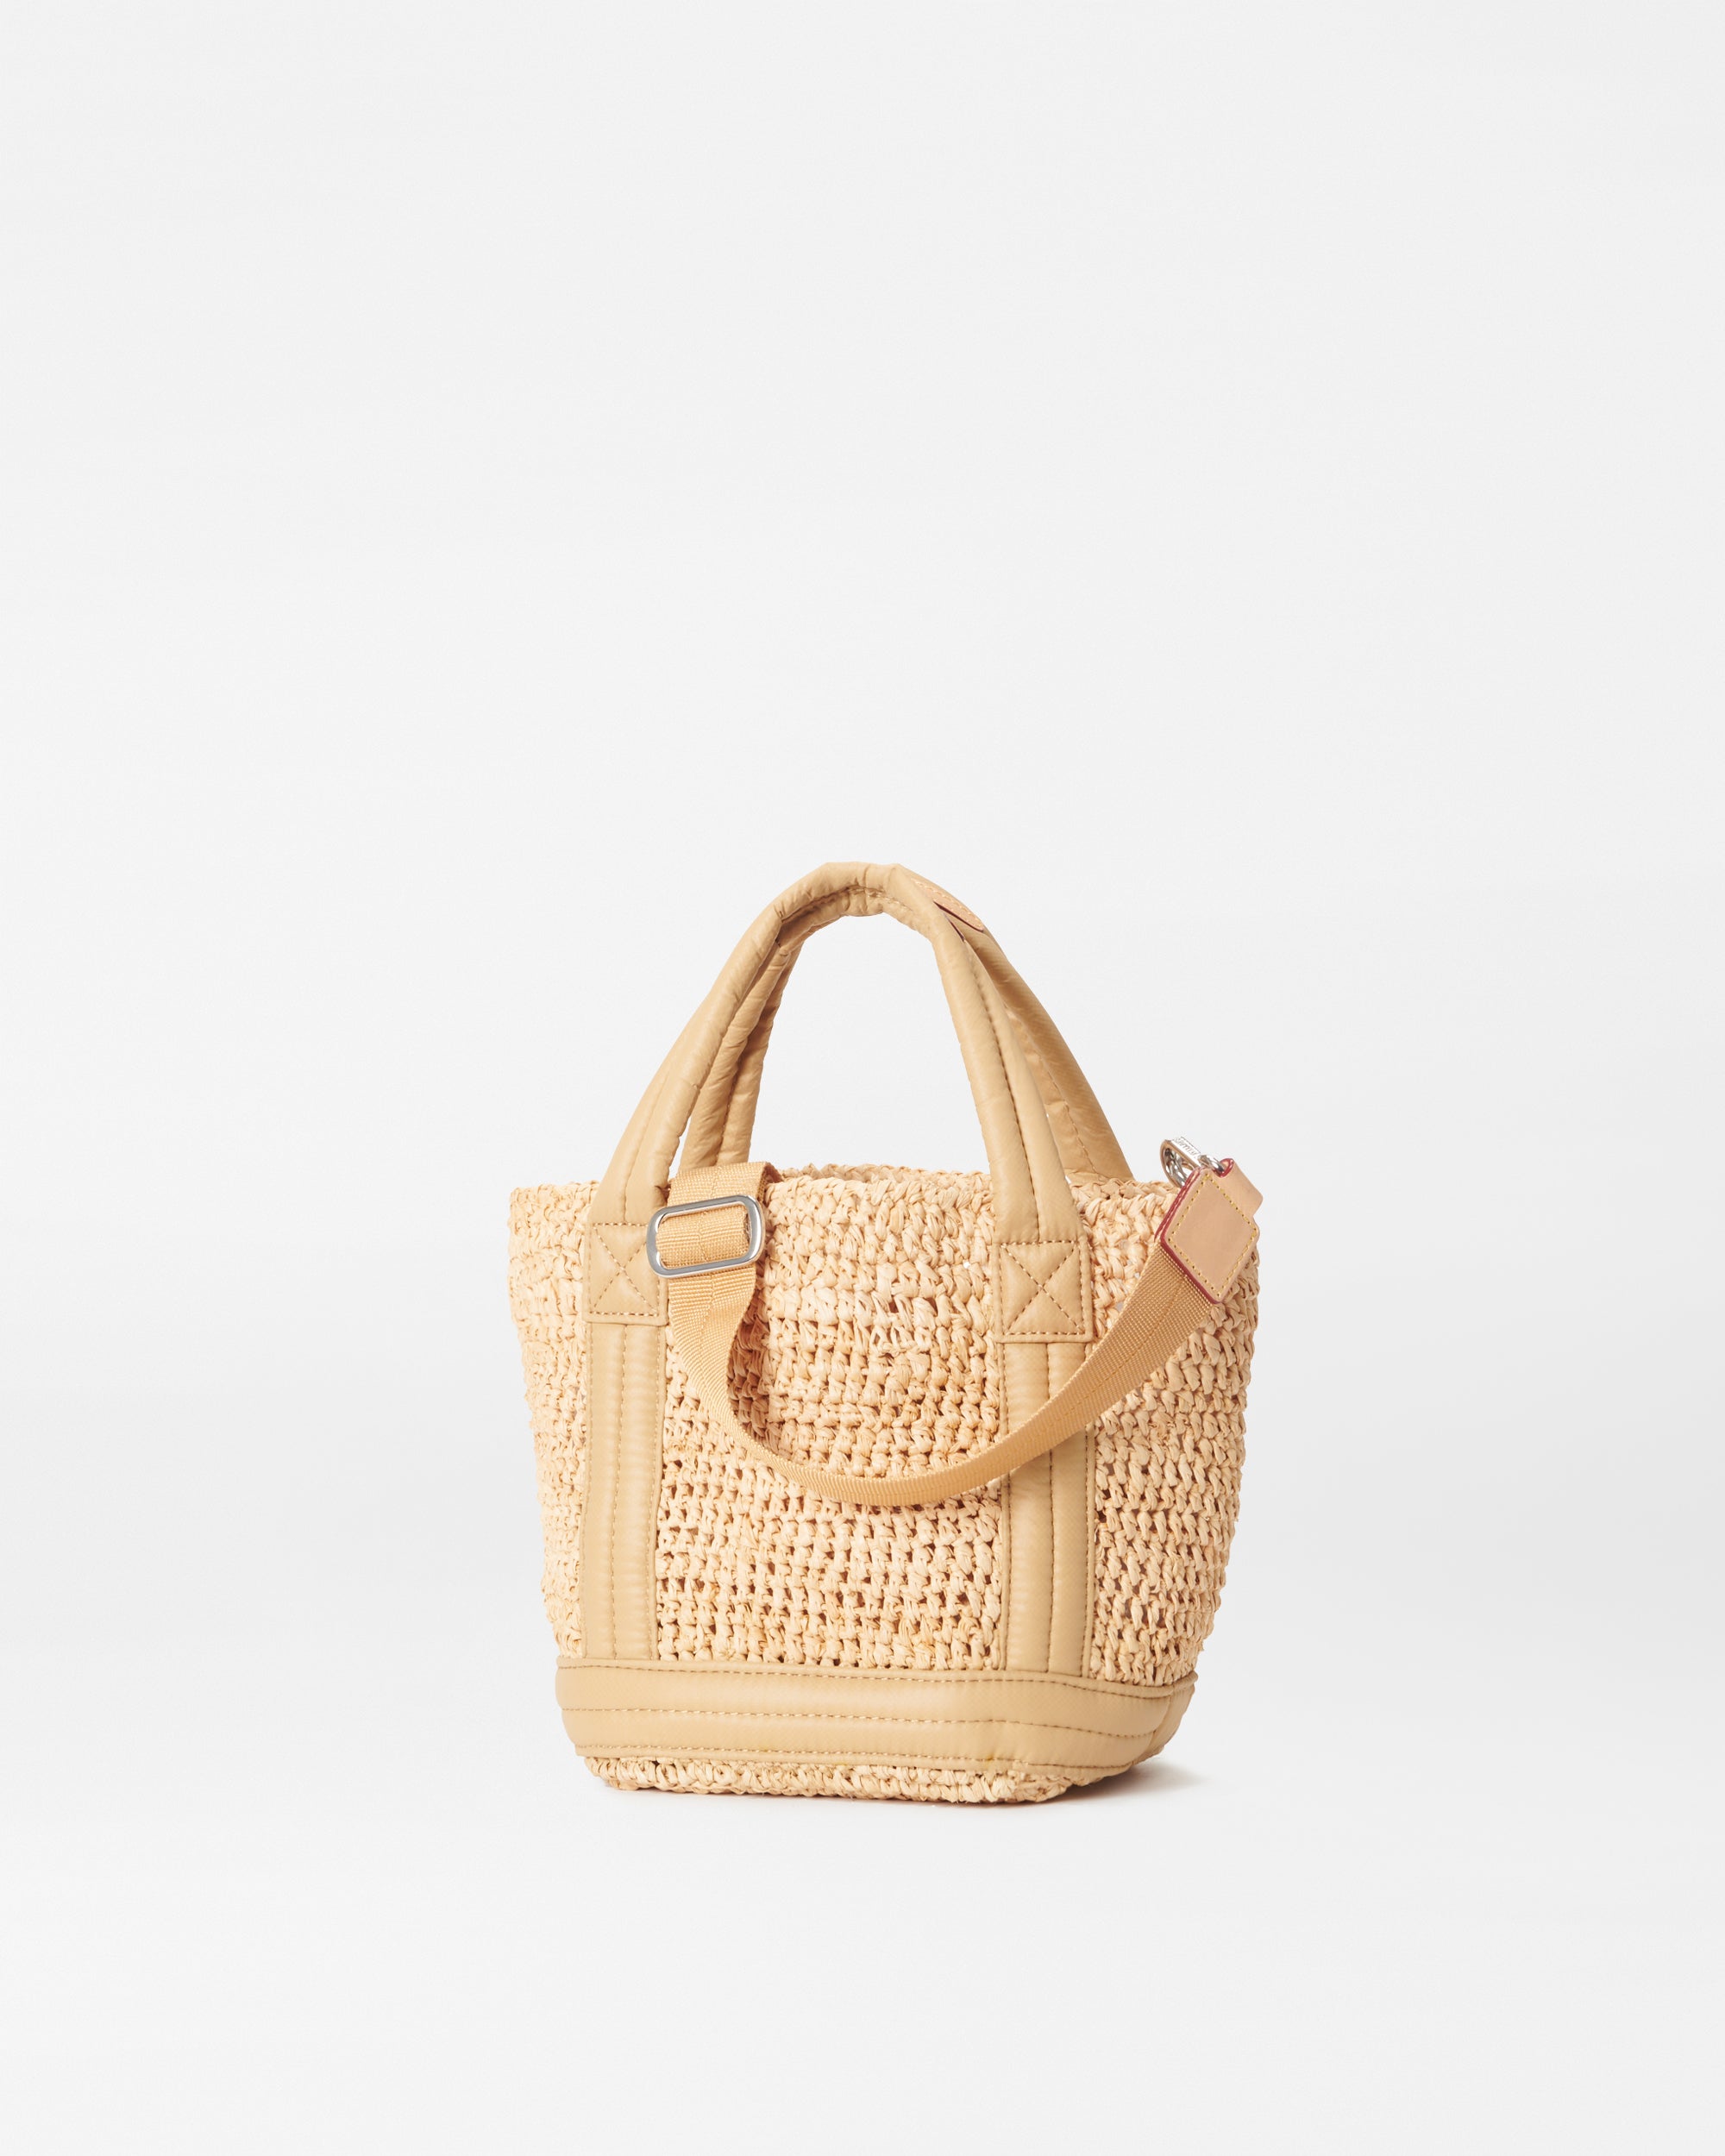 Natural Loose Woven Handmade Raffia Tote With Leather Straps